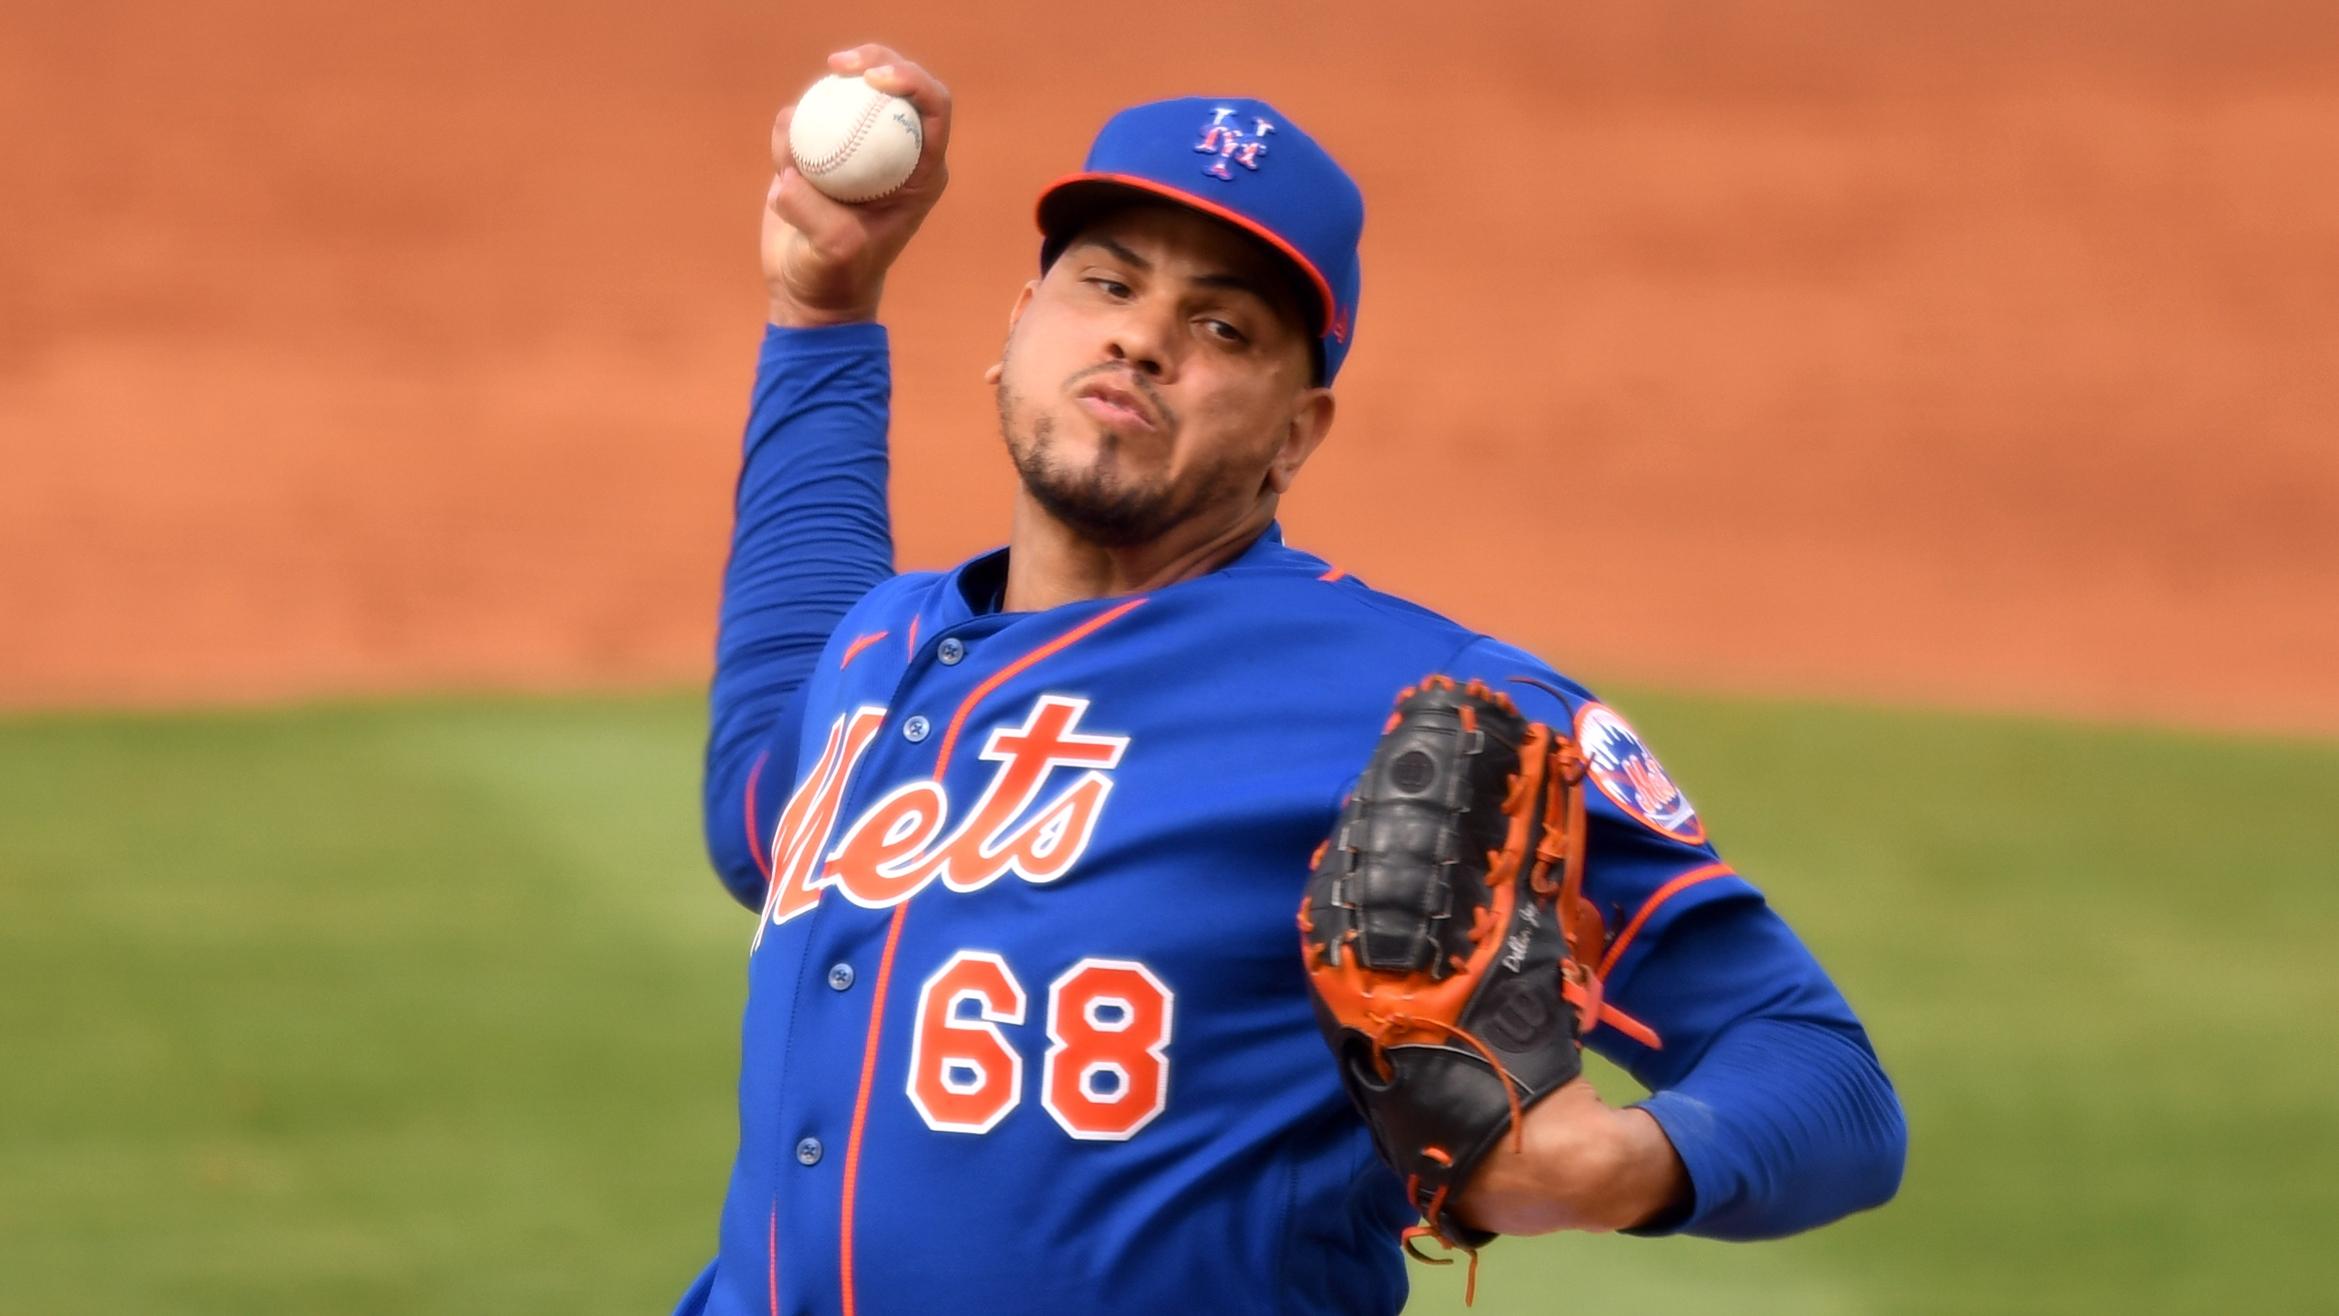 Mar 4, 2021; Port St. Lucie, Florida, USA; New York Mets relief pitcher Dellin Betances (68) pitches against the Washington Nationals in the fifth inning of a spring training game at Clover Park. / Jim Rassol-USA TODAY Sports